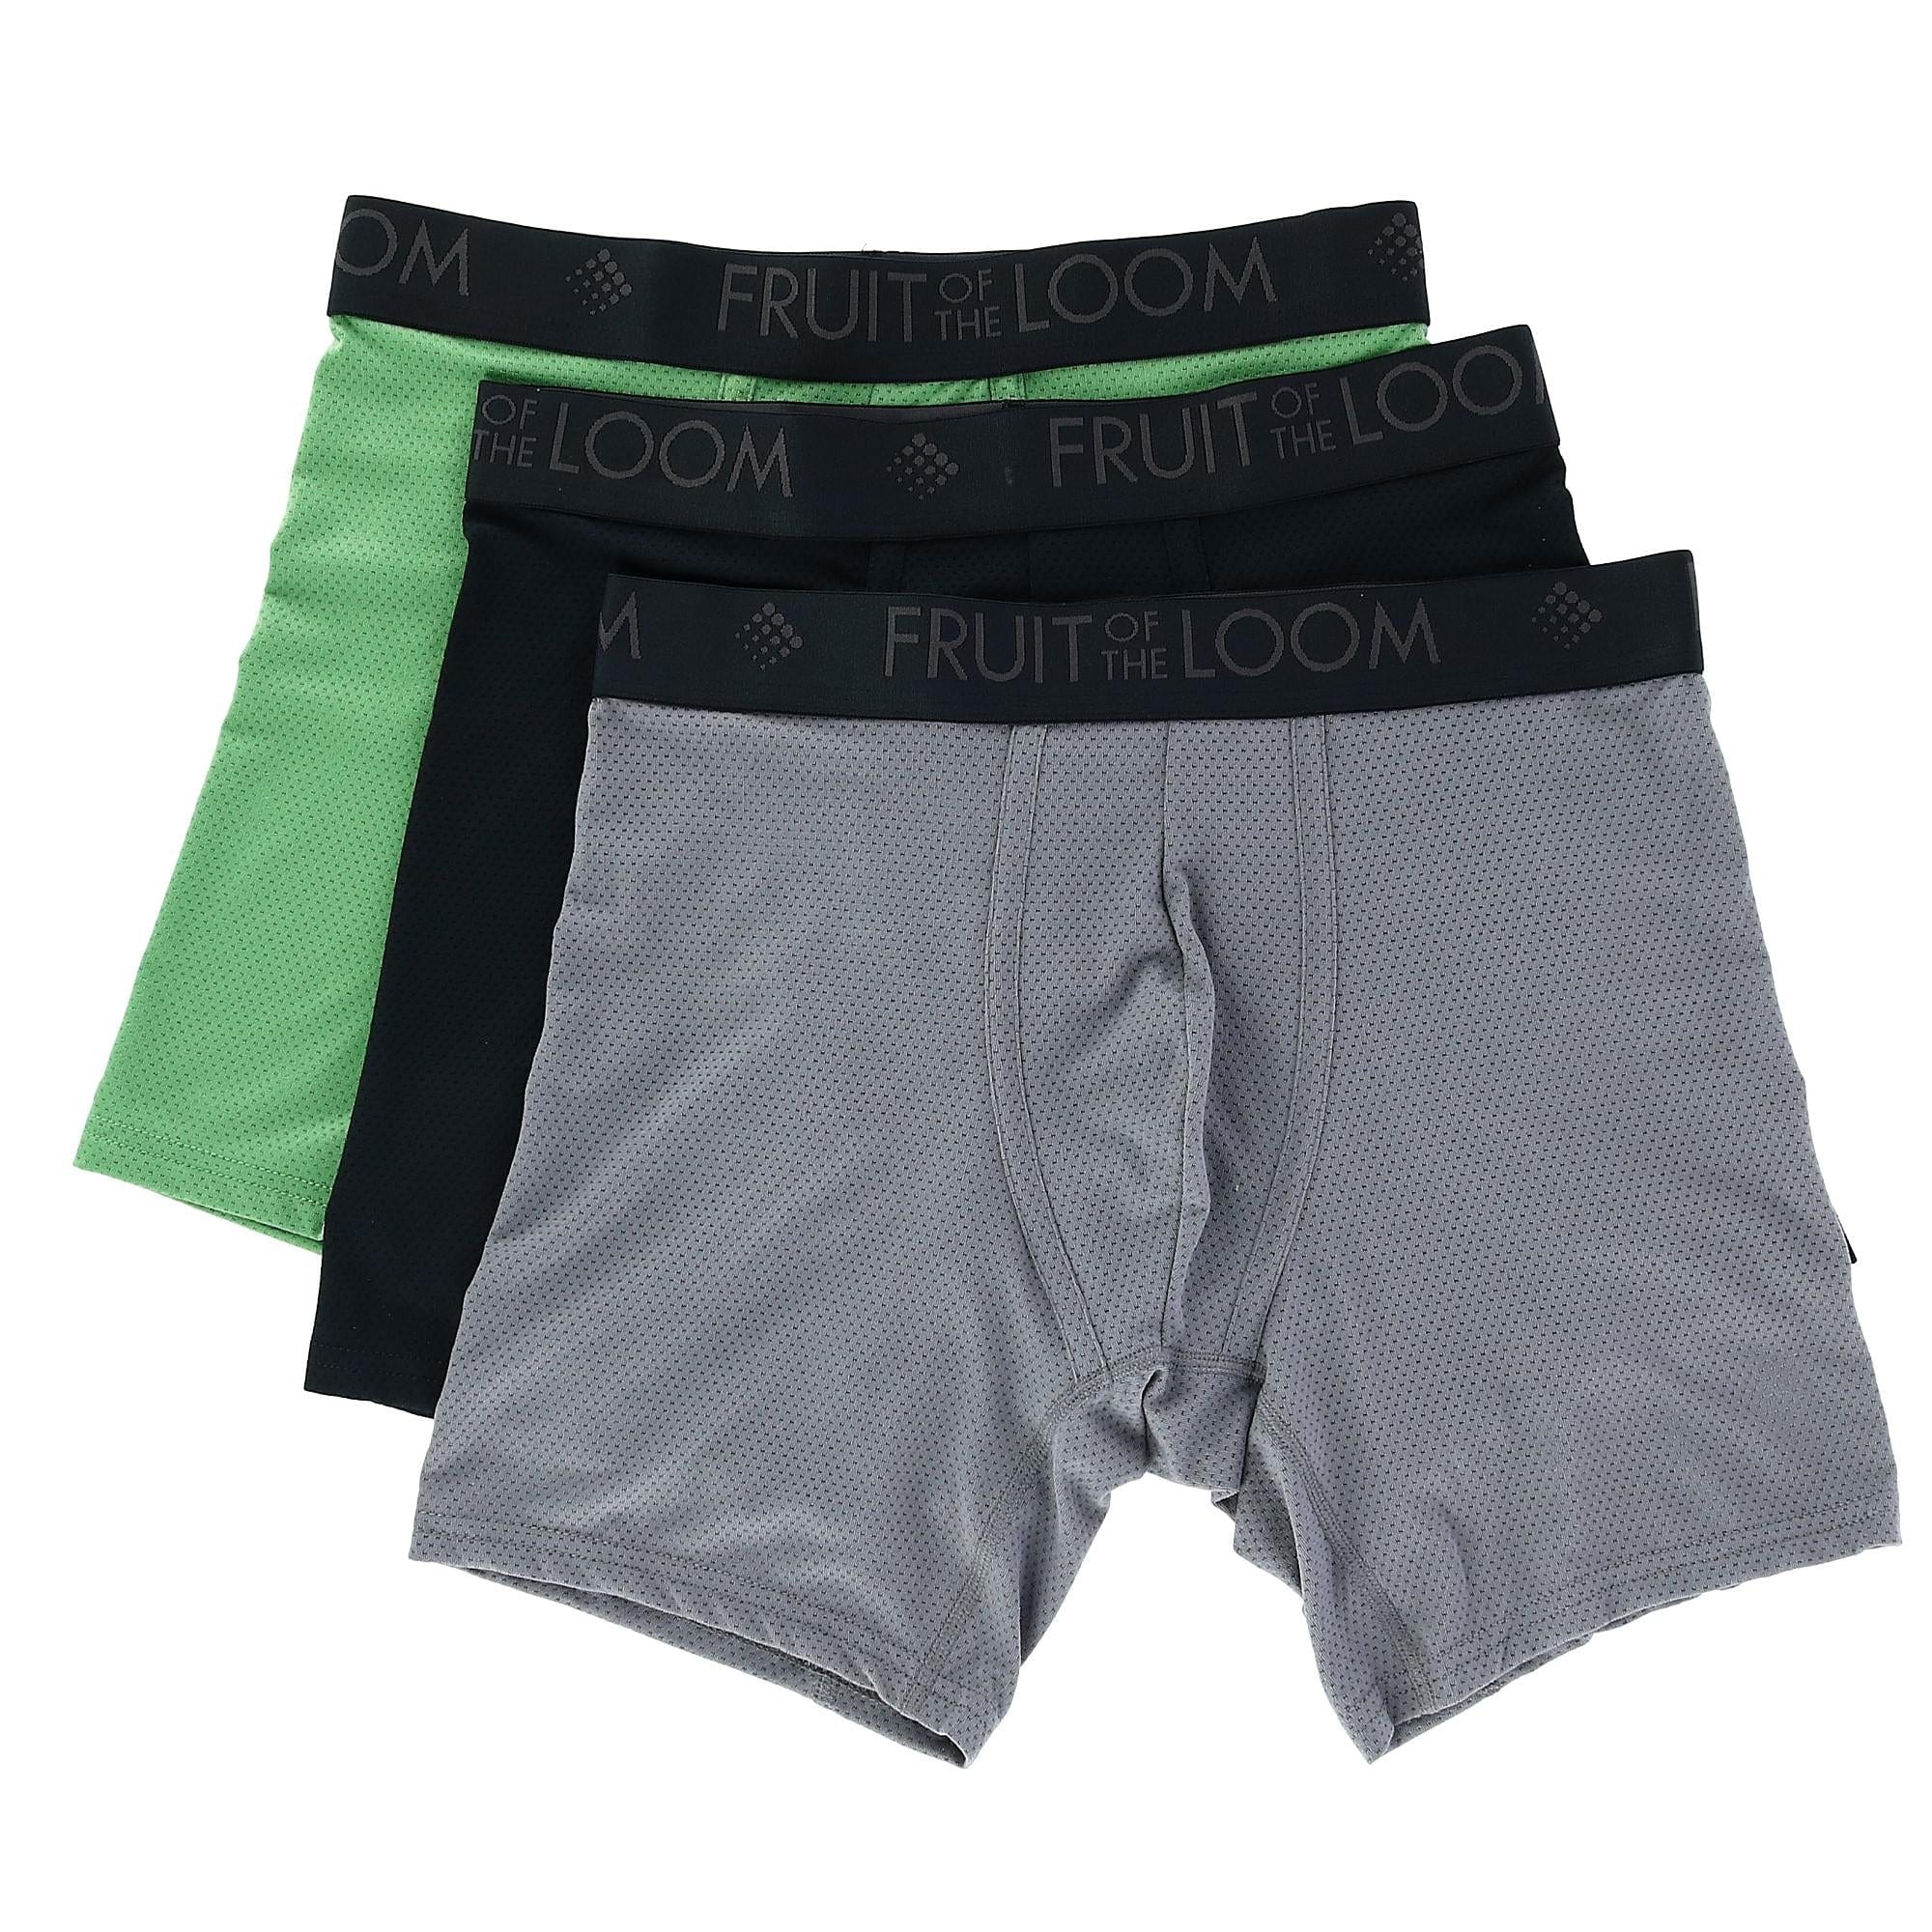 Fruit of the Loom Men's Micro-Stretch Trunk Boxer Briefs, 6 Pack